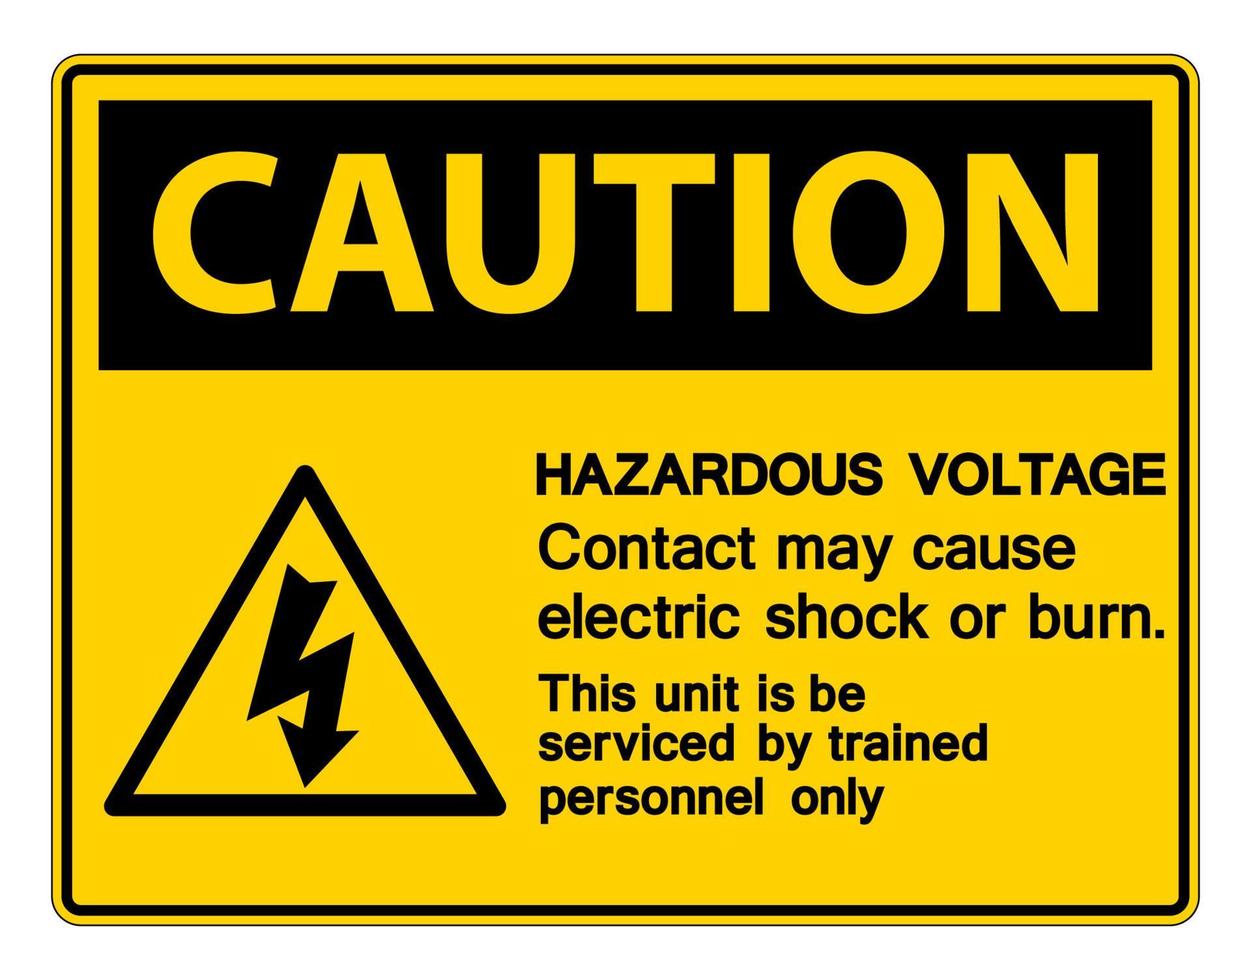 Hazardous Voltage Contact May Cause Electric Shock Or Burn Sign On White Background vector